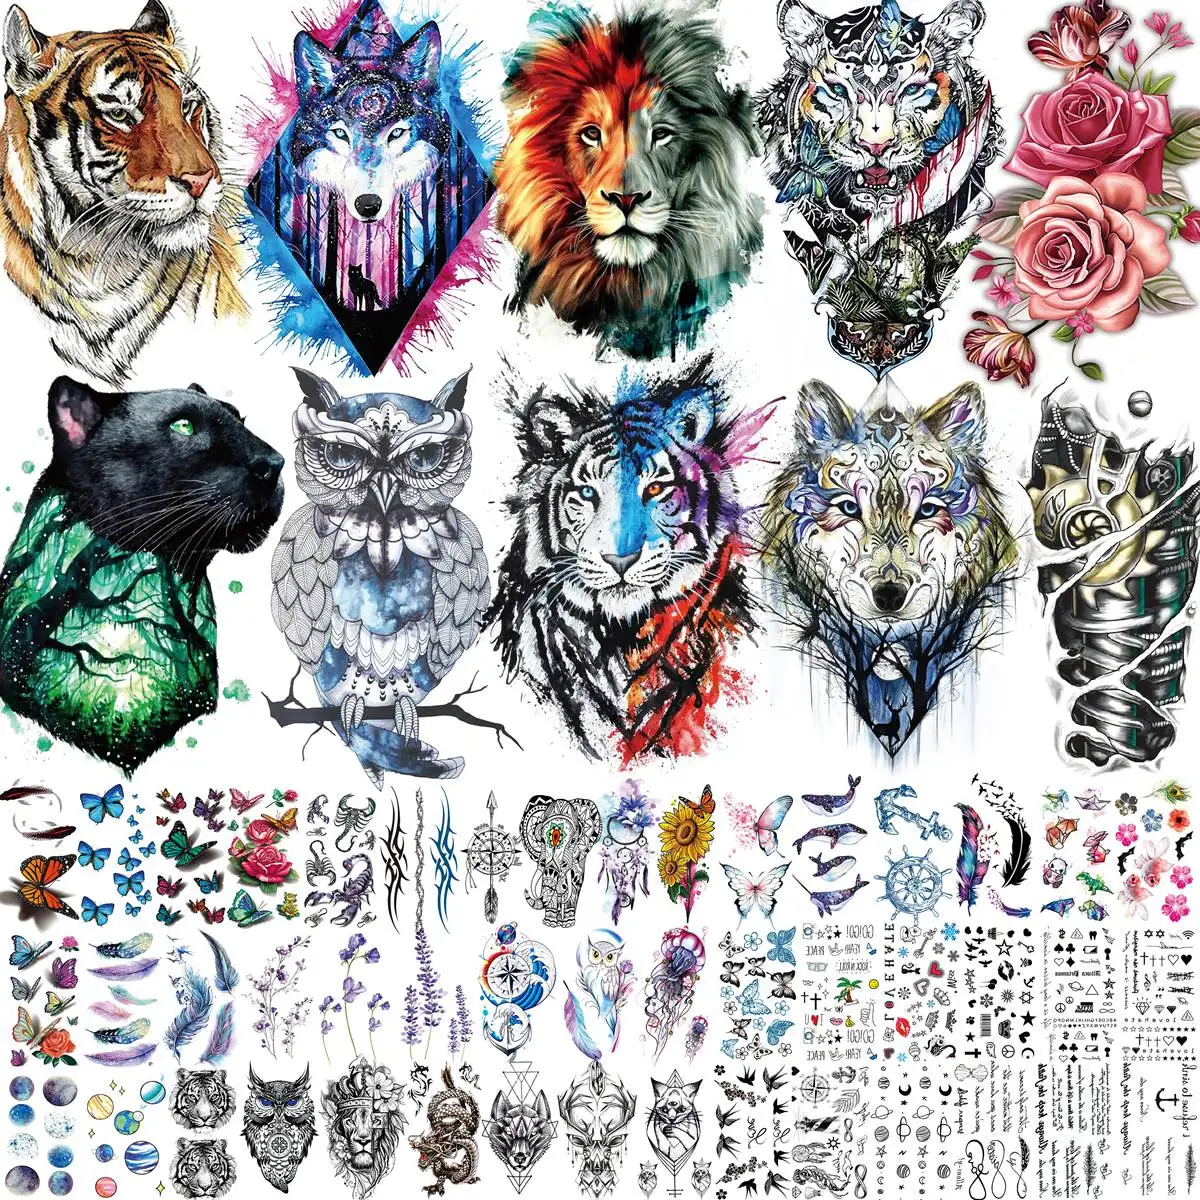 

56 Sheets Watercolor Owl Tiger Lion Temporary Tattoos For Women Men Body Art Arm Tattoo Paste Realistic Fake Flower Tatoos Decal